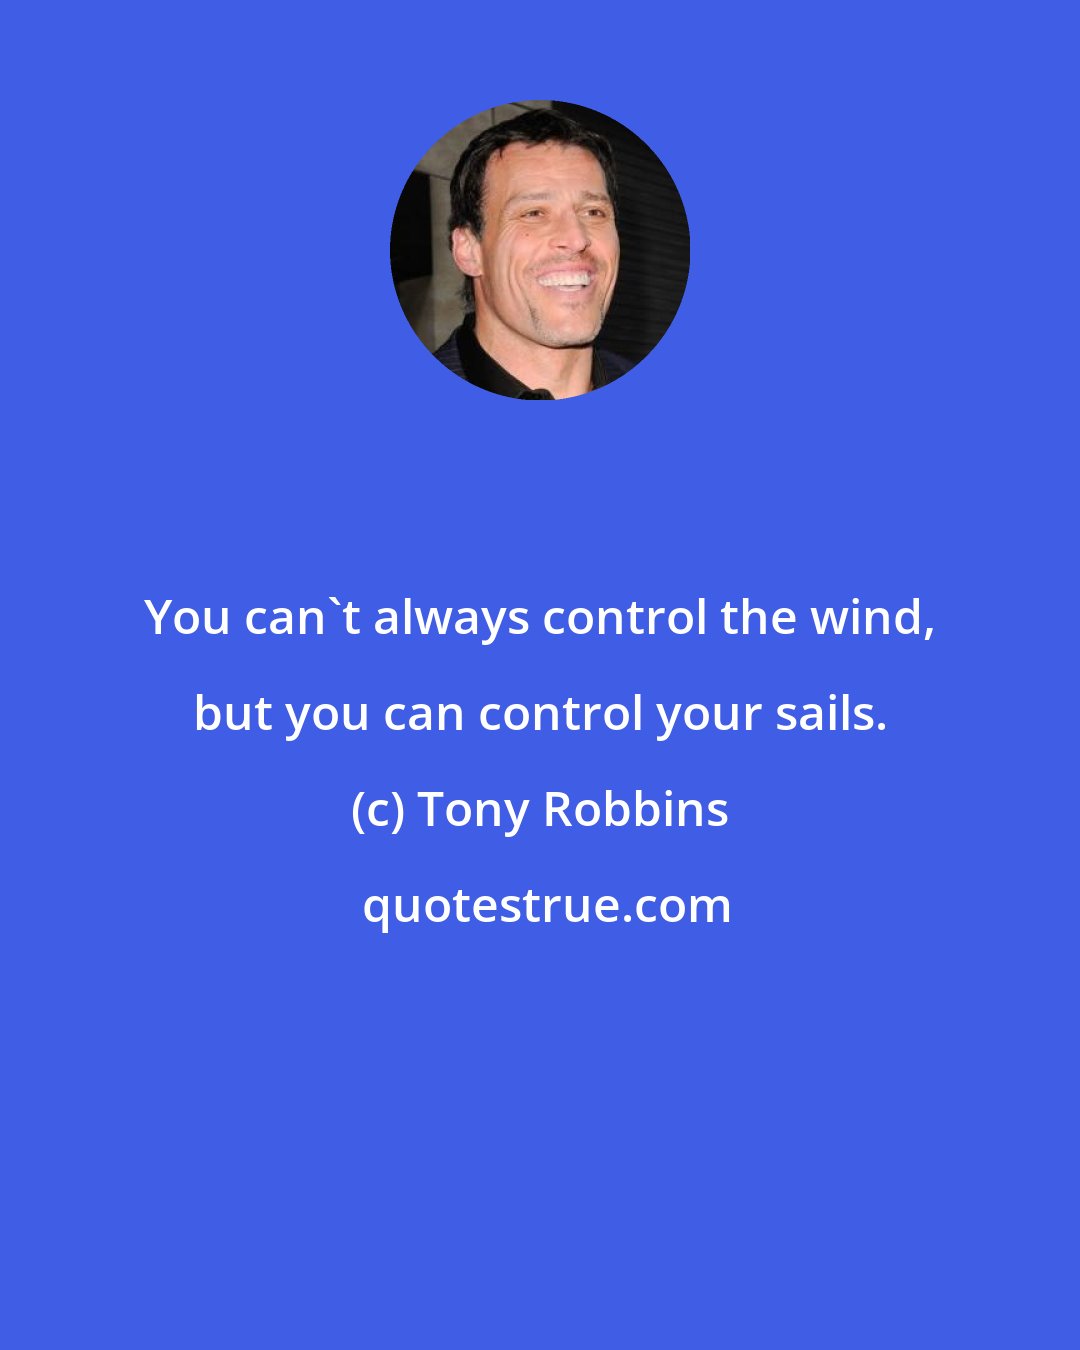 Tony Robbins: You can't always control the wind, but you can control your sails.